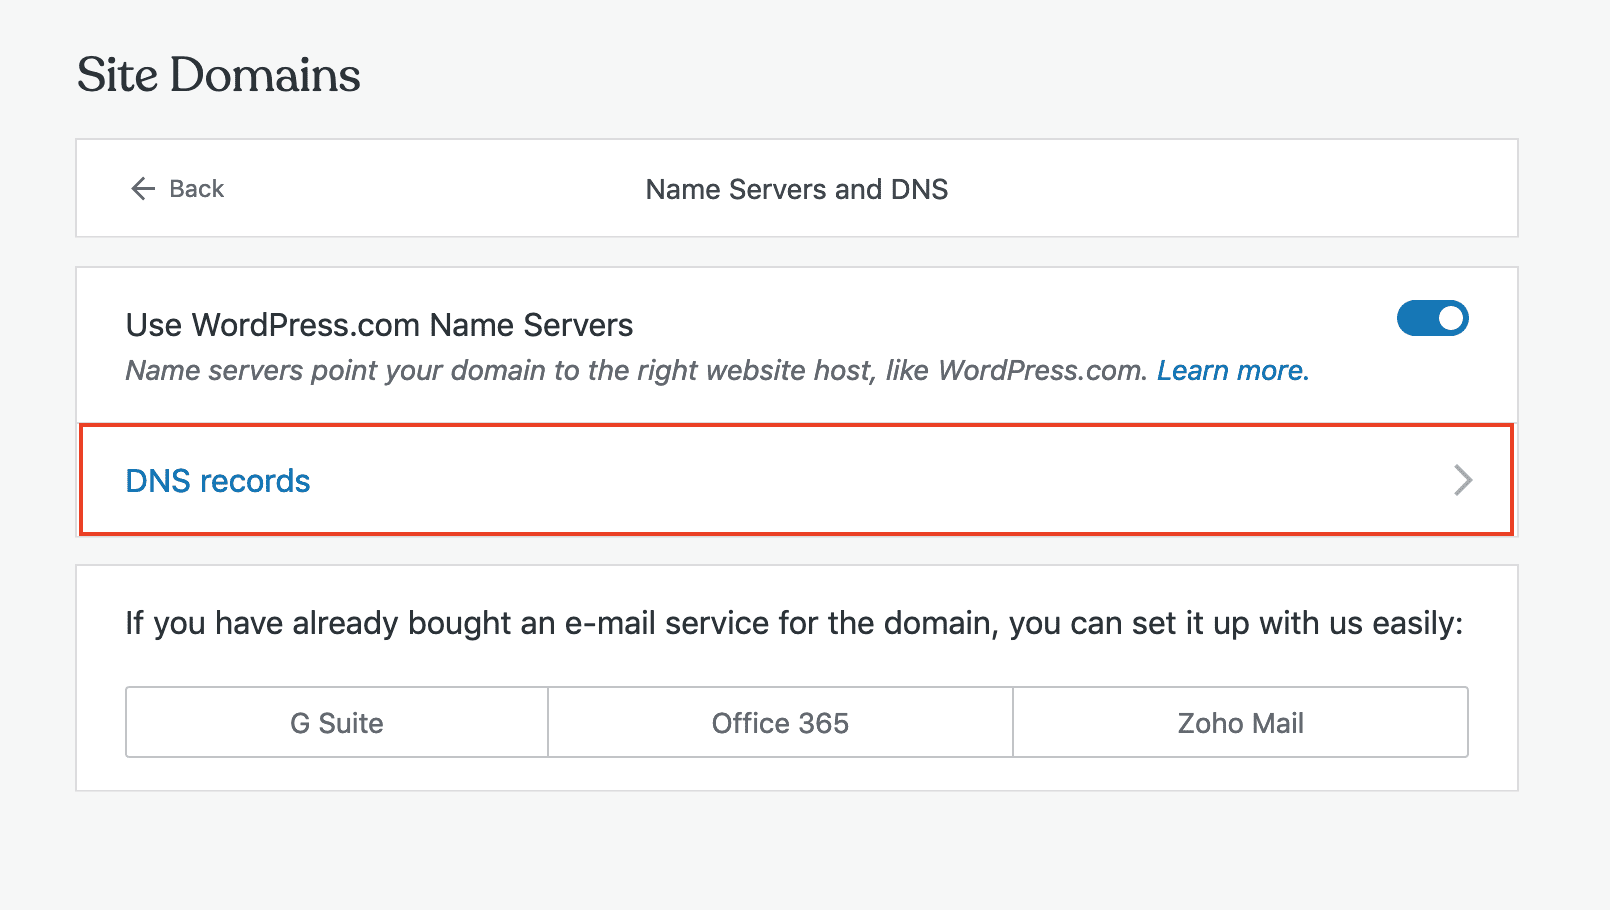 Name server and DNS settings in Pressable.